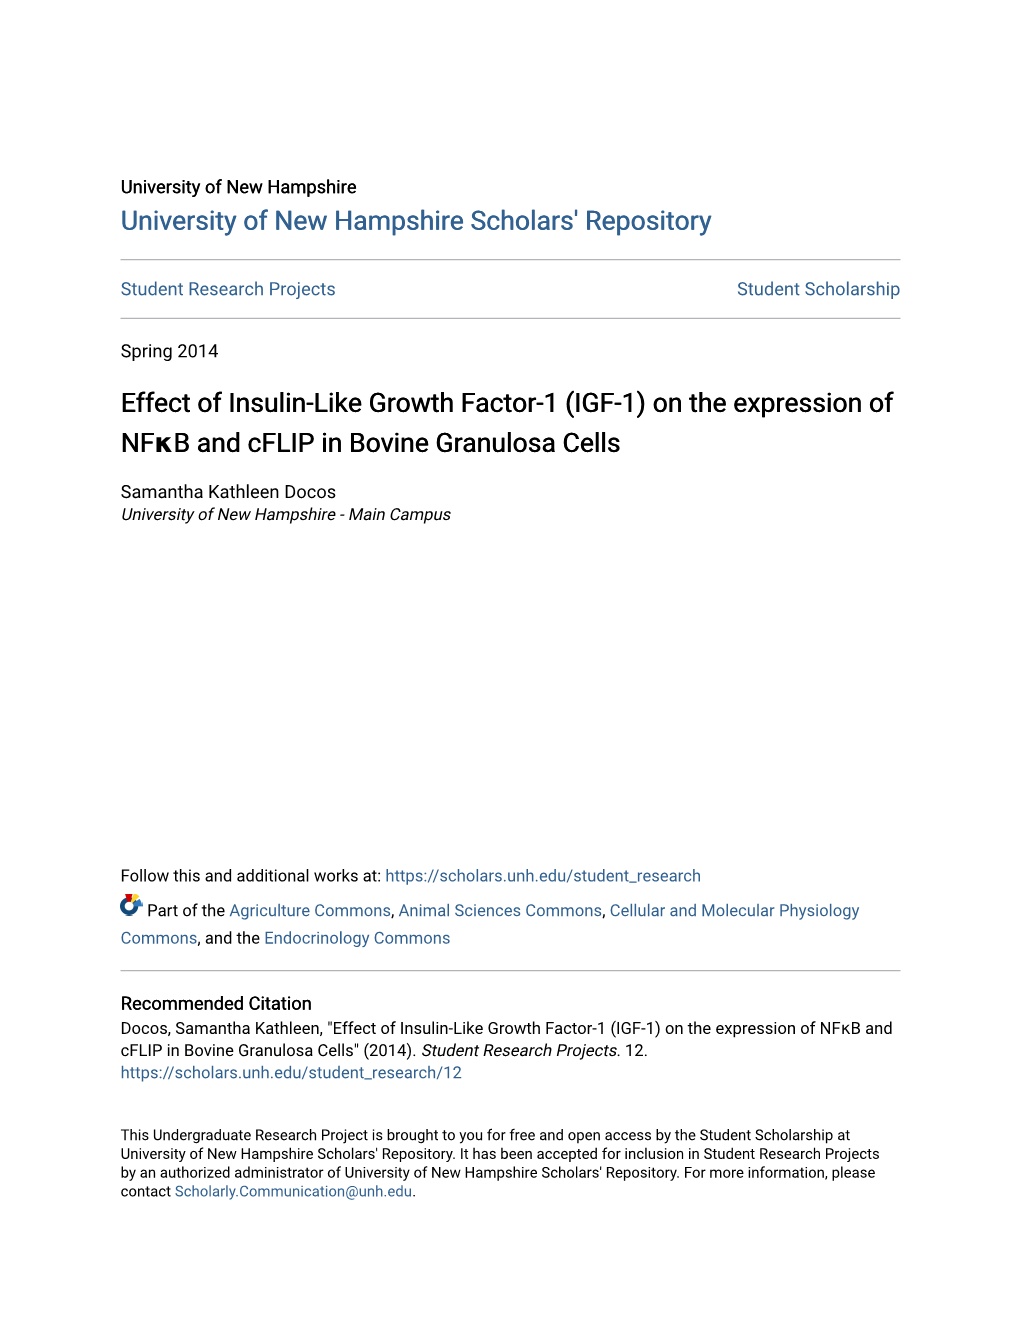 Effect of Insulin-Like Growth Factor-1 (IGF-1) on the Expression of Nfκb and Cflip in Bovine Granulosa Cells